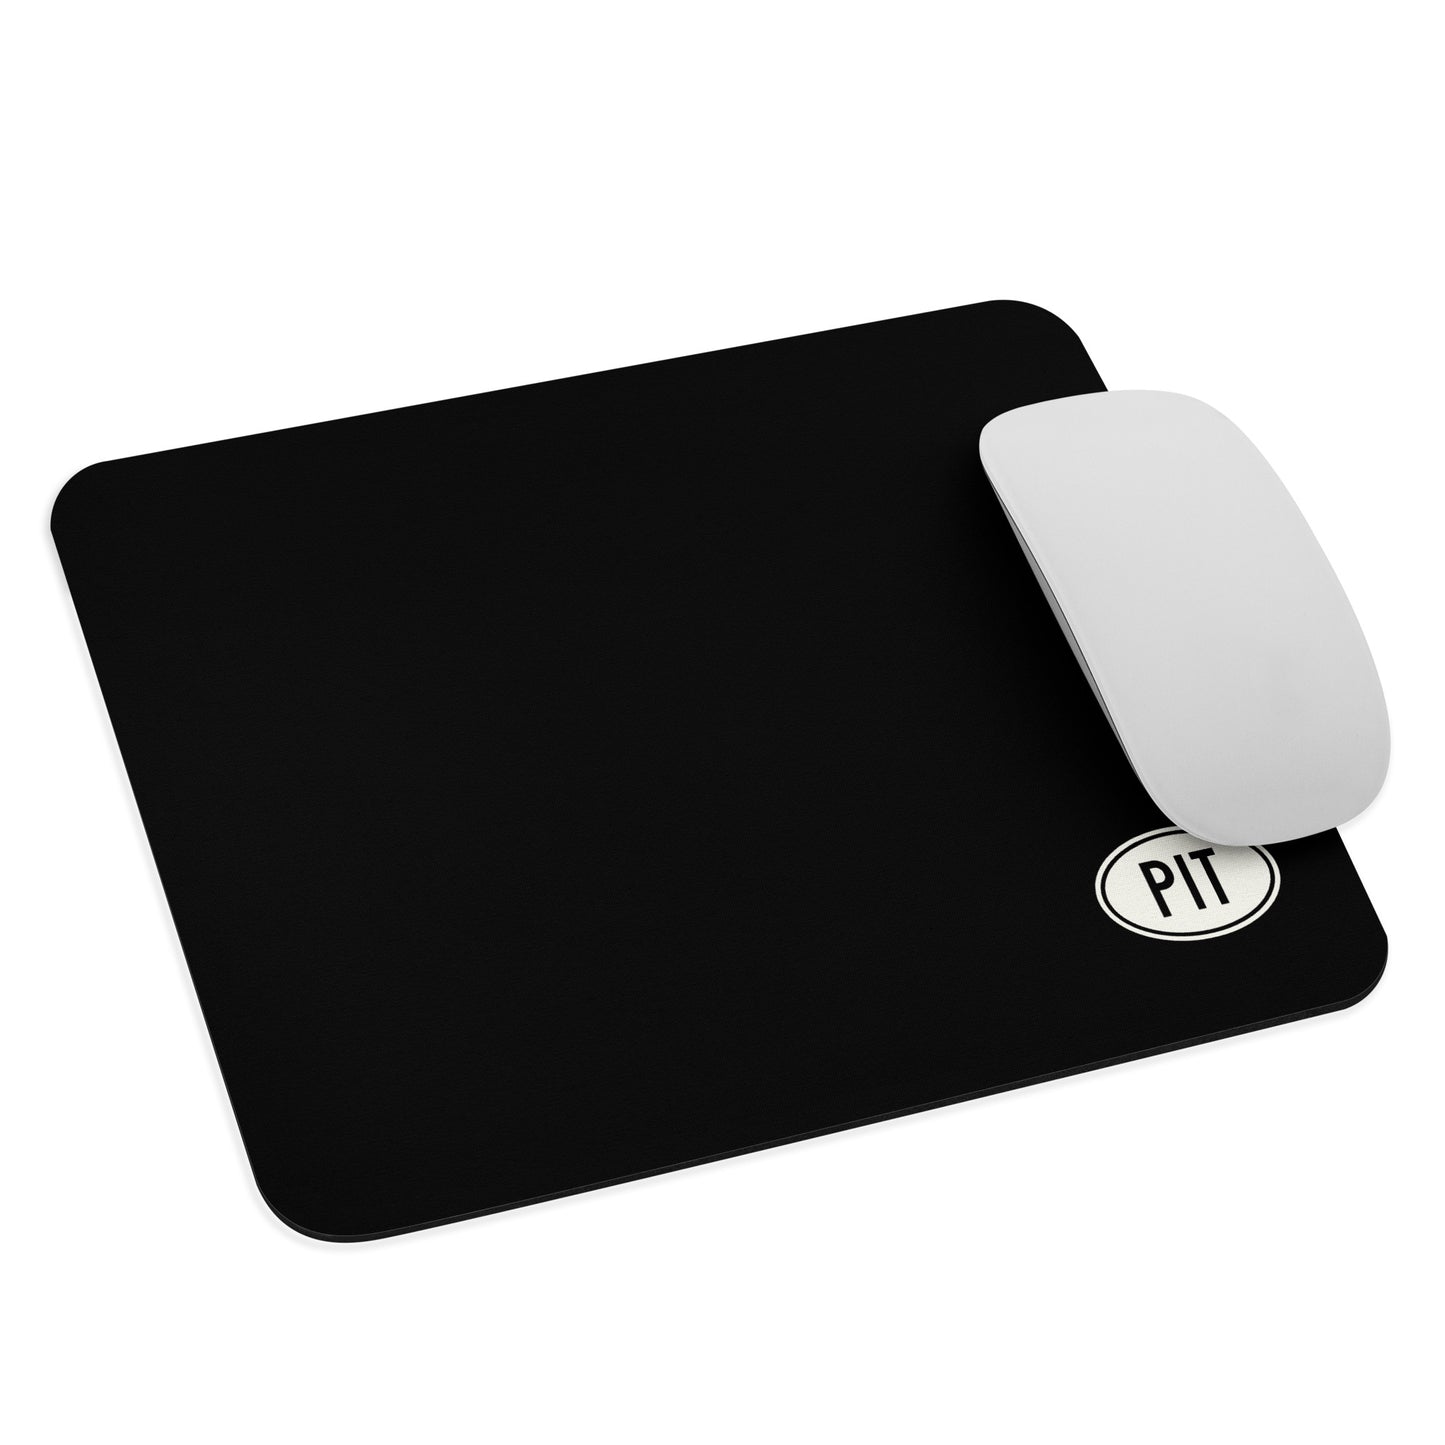 Unique Travel Gift Mouse Pad - White Oval • PIT Pittsburgh • YHM Designs - Image 03